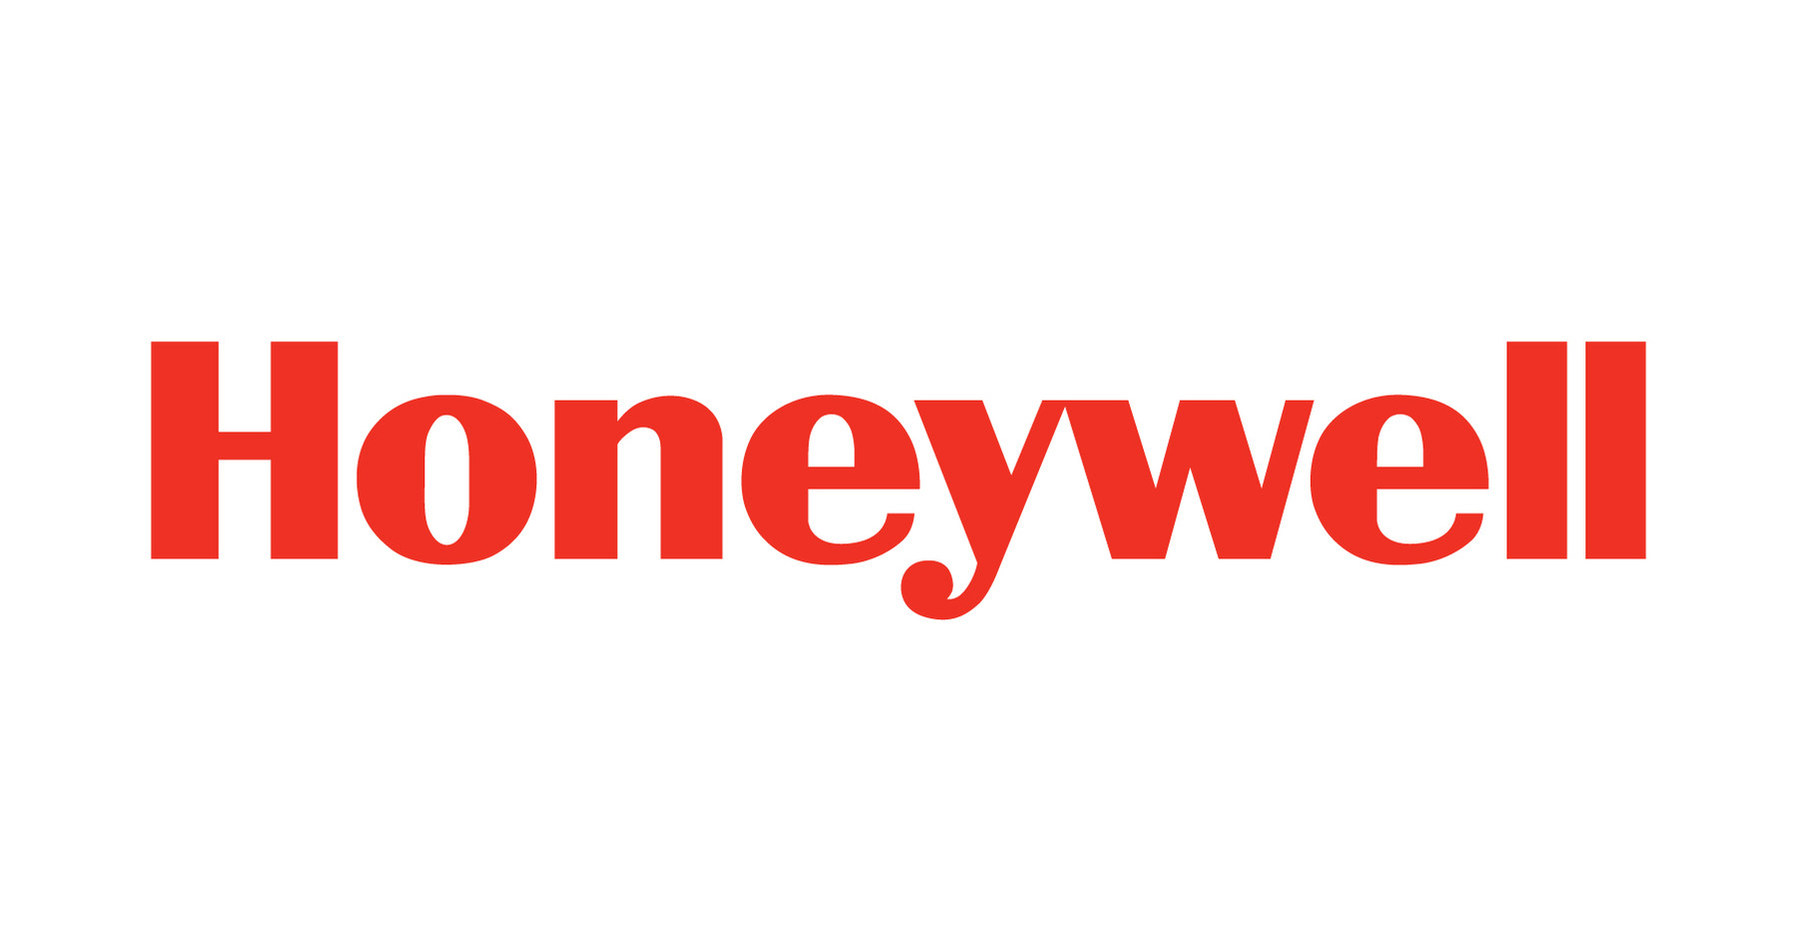 HONEYWELL TECHNOLOGY PROVIDES TRACTOR SUPPLY WITH INDUSTRY-LEADING END-TO-END TEAM MEMBER AND CUSTOMER EXPERIENCES